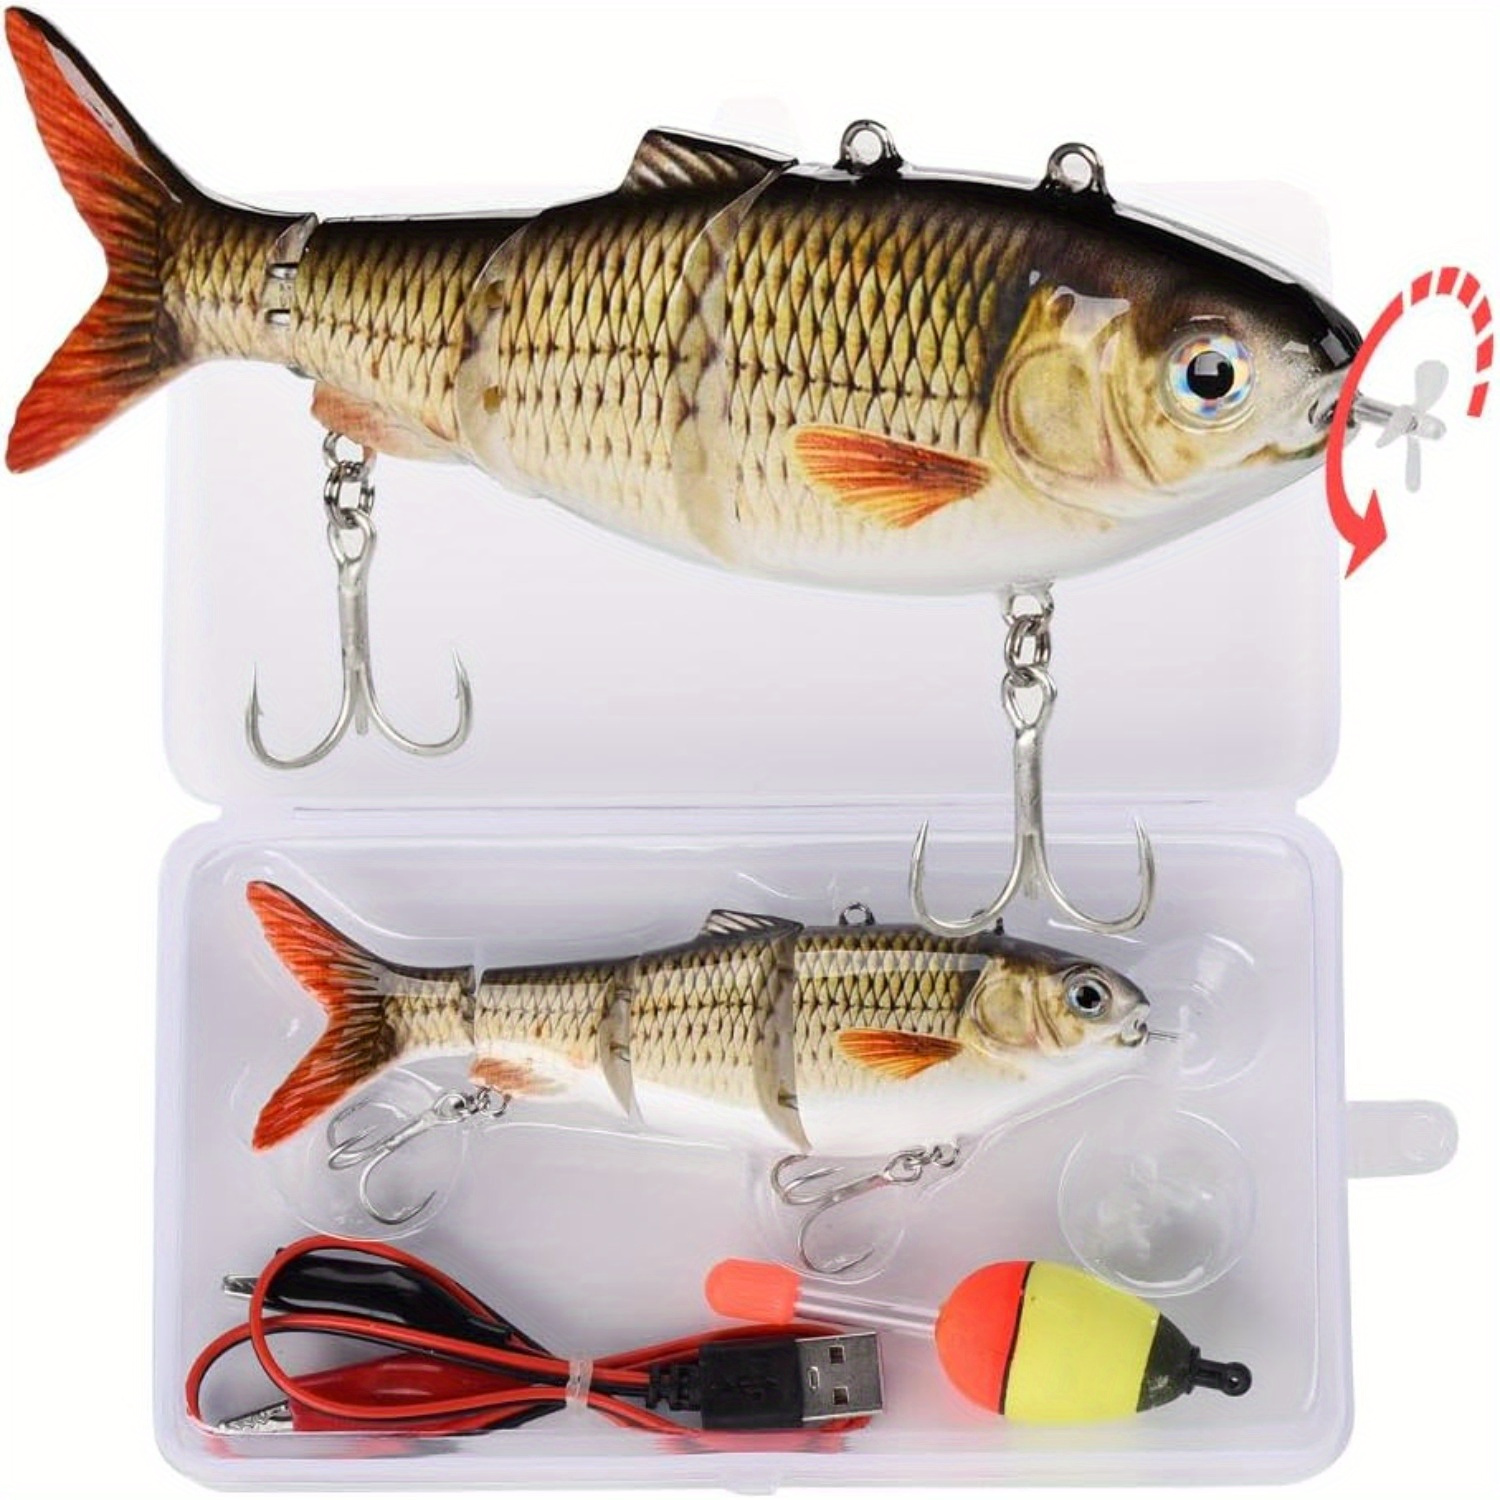 

Robotic Swimming Lure Fishing Lure 4-segement Multi Jointed Swimbait Bait Robotic Lure For Bass Trout Pike Fishing Tackle